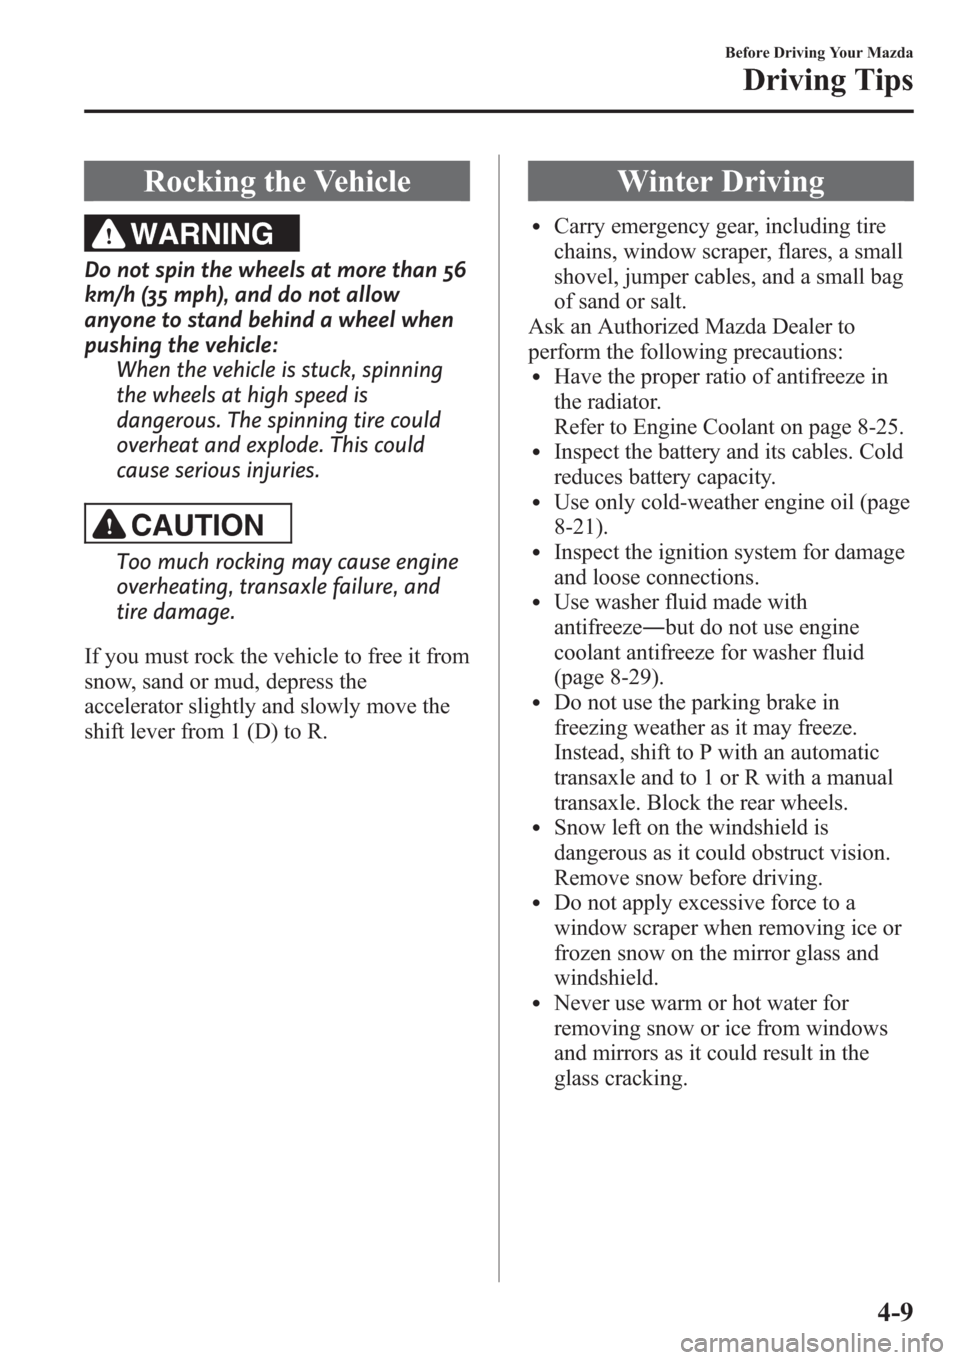 MAZDA MODEL 3 HATCHBACK 2013  Owners Manual (in English) Rocking the Vehicle
WARNING
Do not spin the wheels at more than 56
km/h (35 mph), and do not allow
anyone to stand behind a wheel when
pushing the vehicle:
When the vehicle is stuck, spinning
the whee